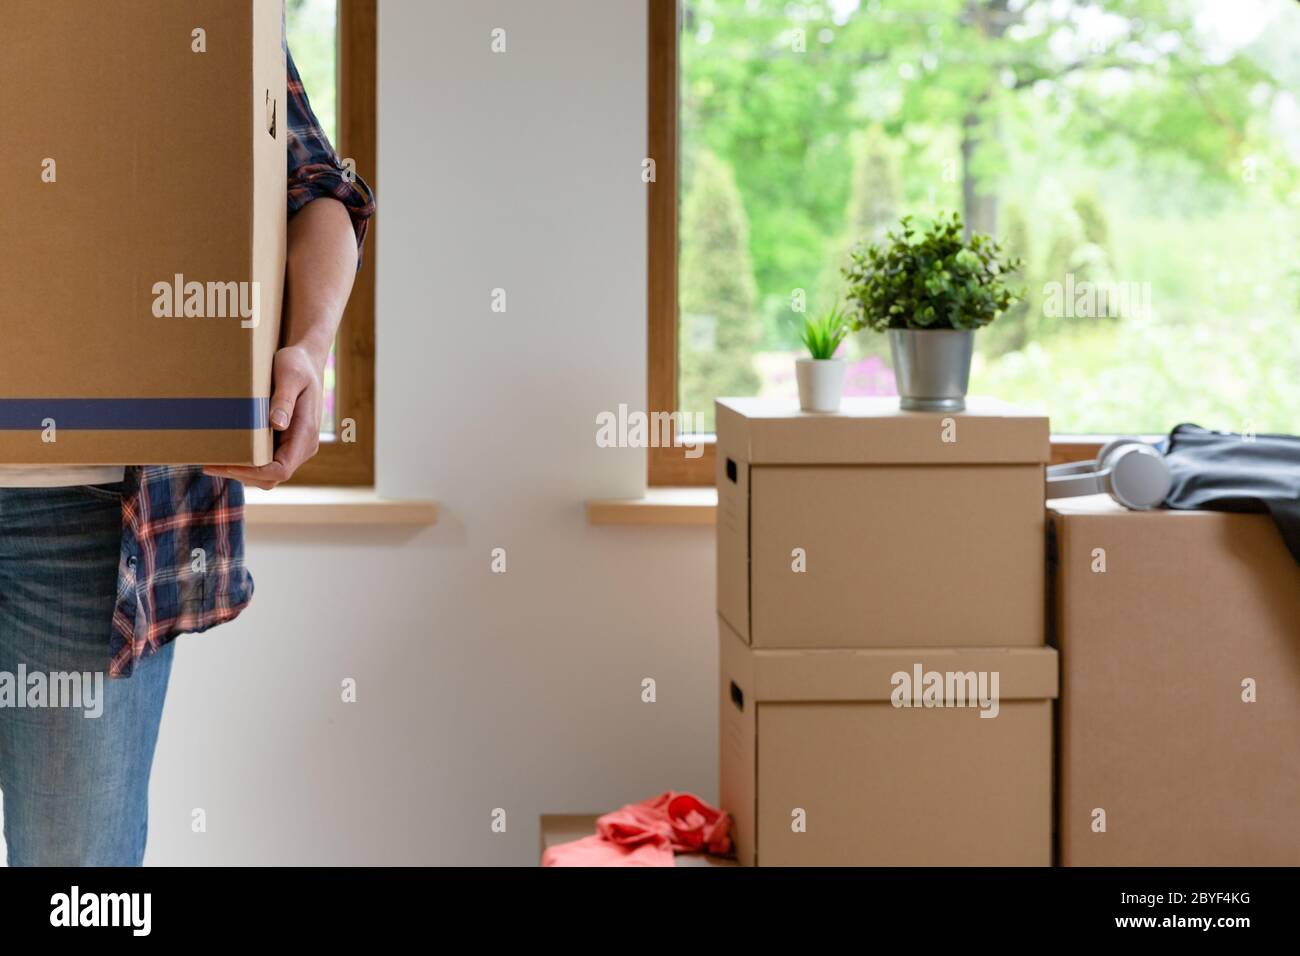 Move. Cardboard boxes for moving into a new, clean home. In a sunny day by a window in attic. Stock Photo